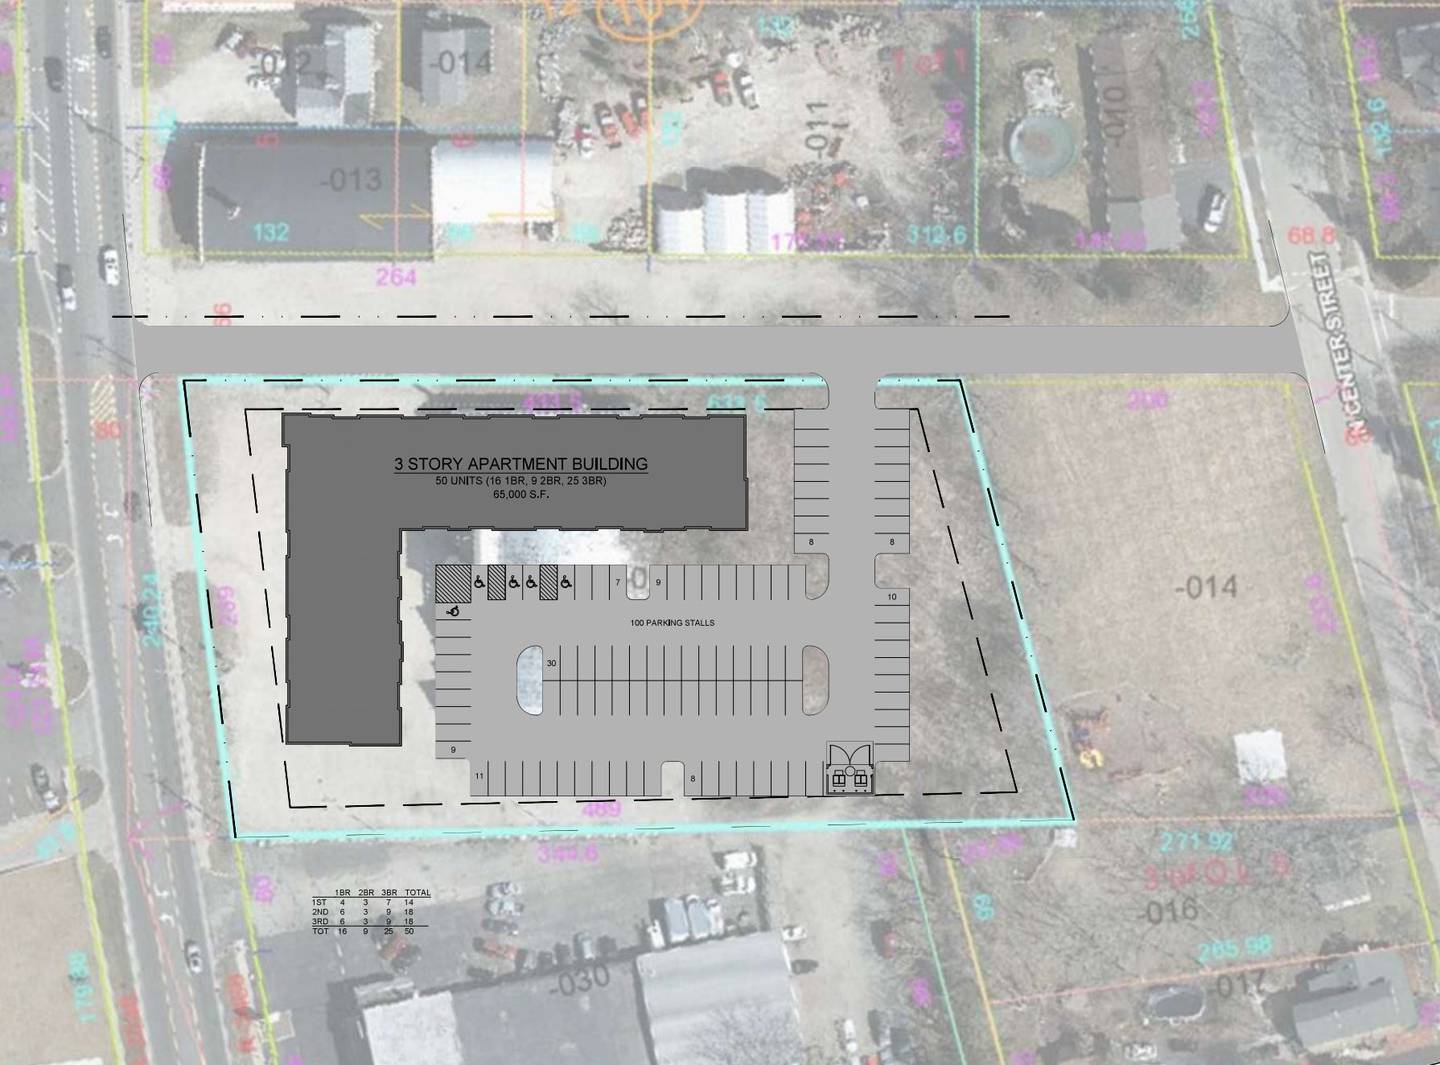 A screenshot of a city of McHenry document shows a developer's preliminary sketch of where a three-story, 50-unit apartment building might sit on the former Just For Fun roller rink property in McHenry that was destroyed in what police say was an arson fire in May 2021.